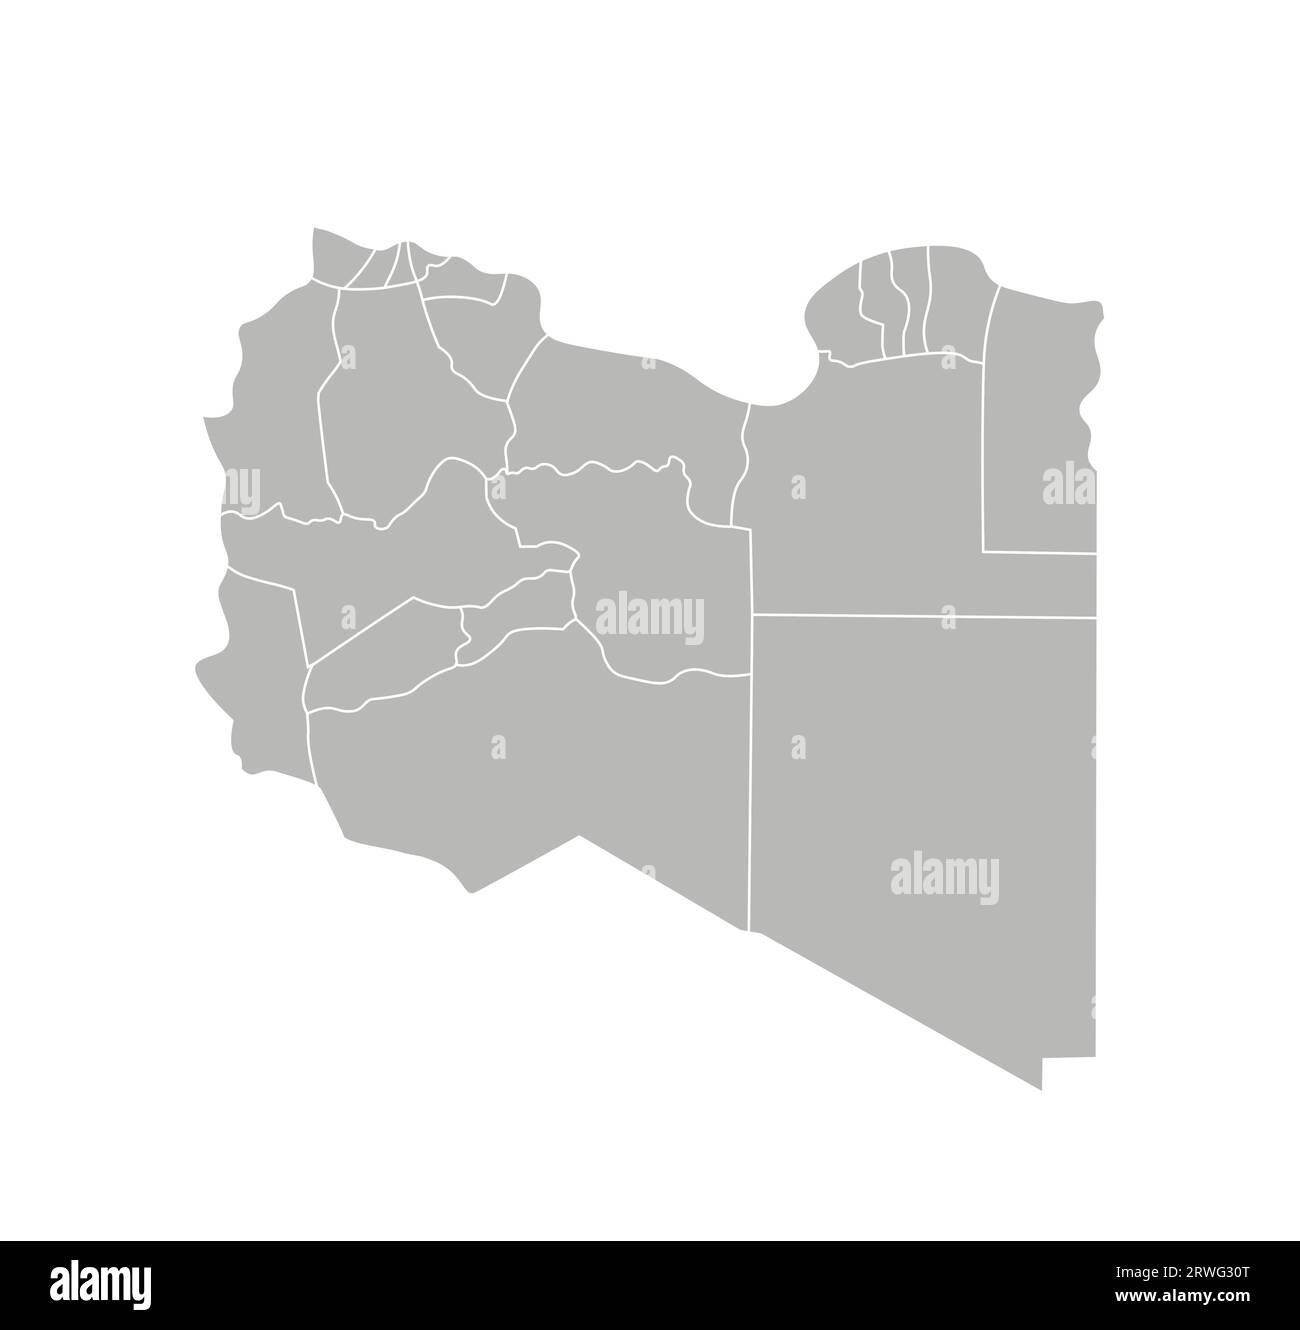 Vector isolated illustration of simplified administrative map of Libya. Borders of the districts (regions). Grey silhouettes. White outline. Stock Vector